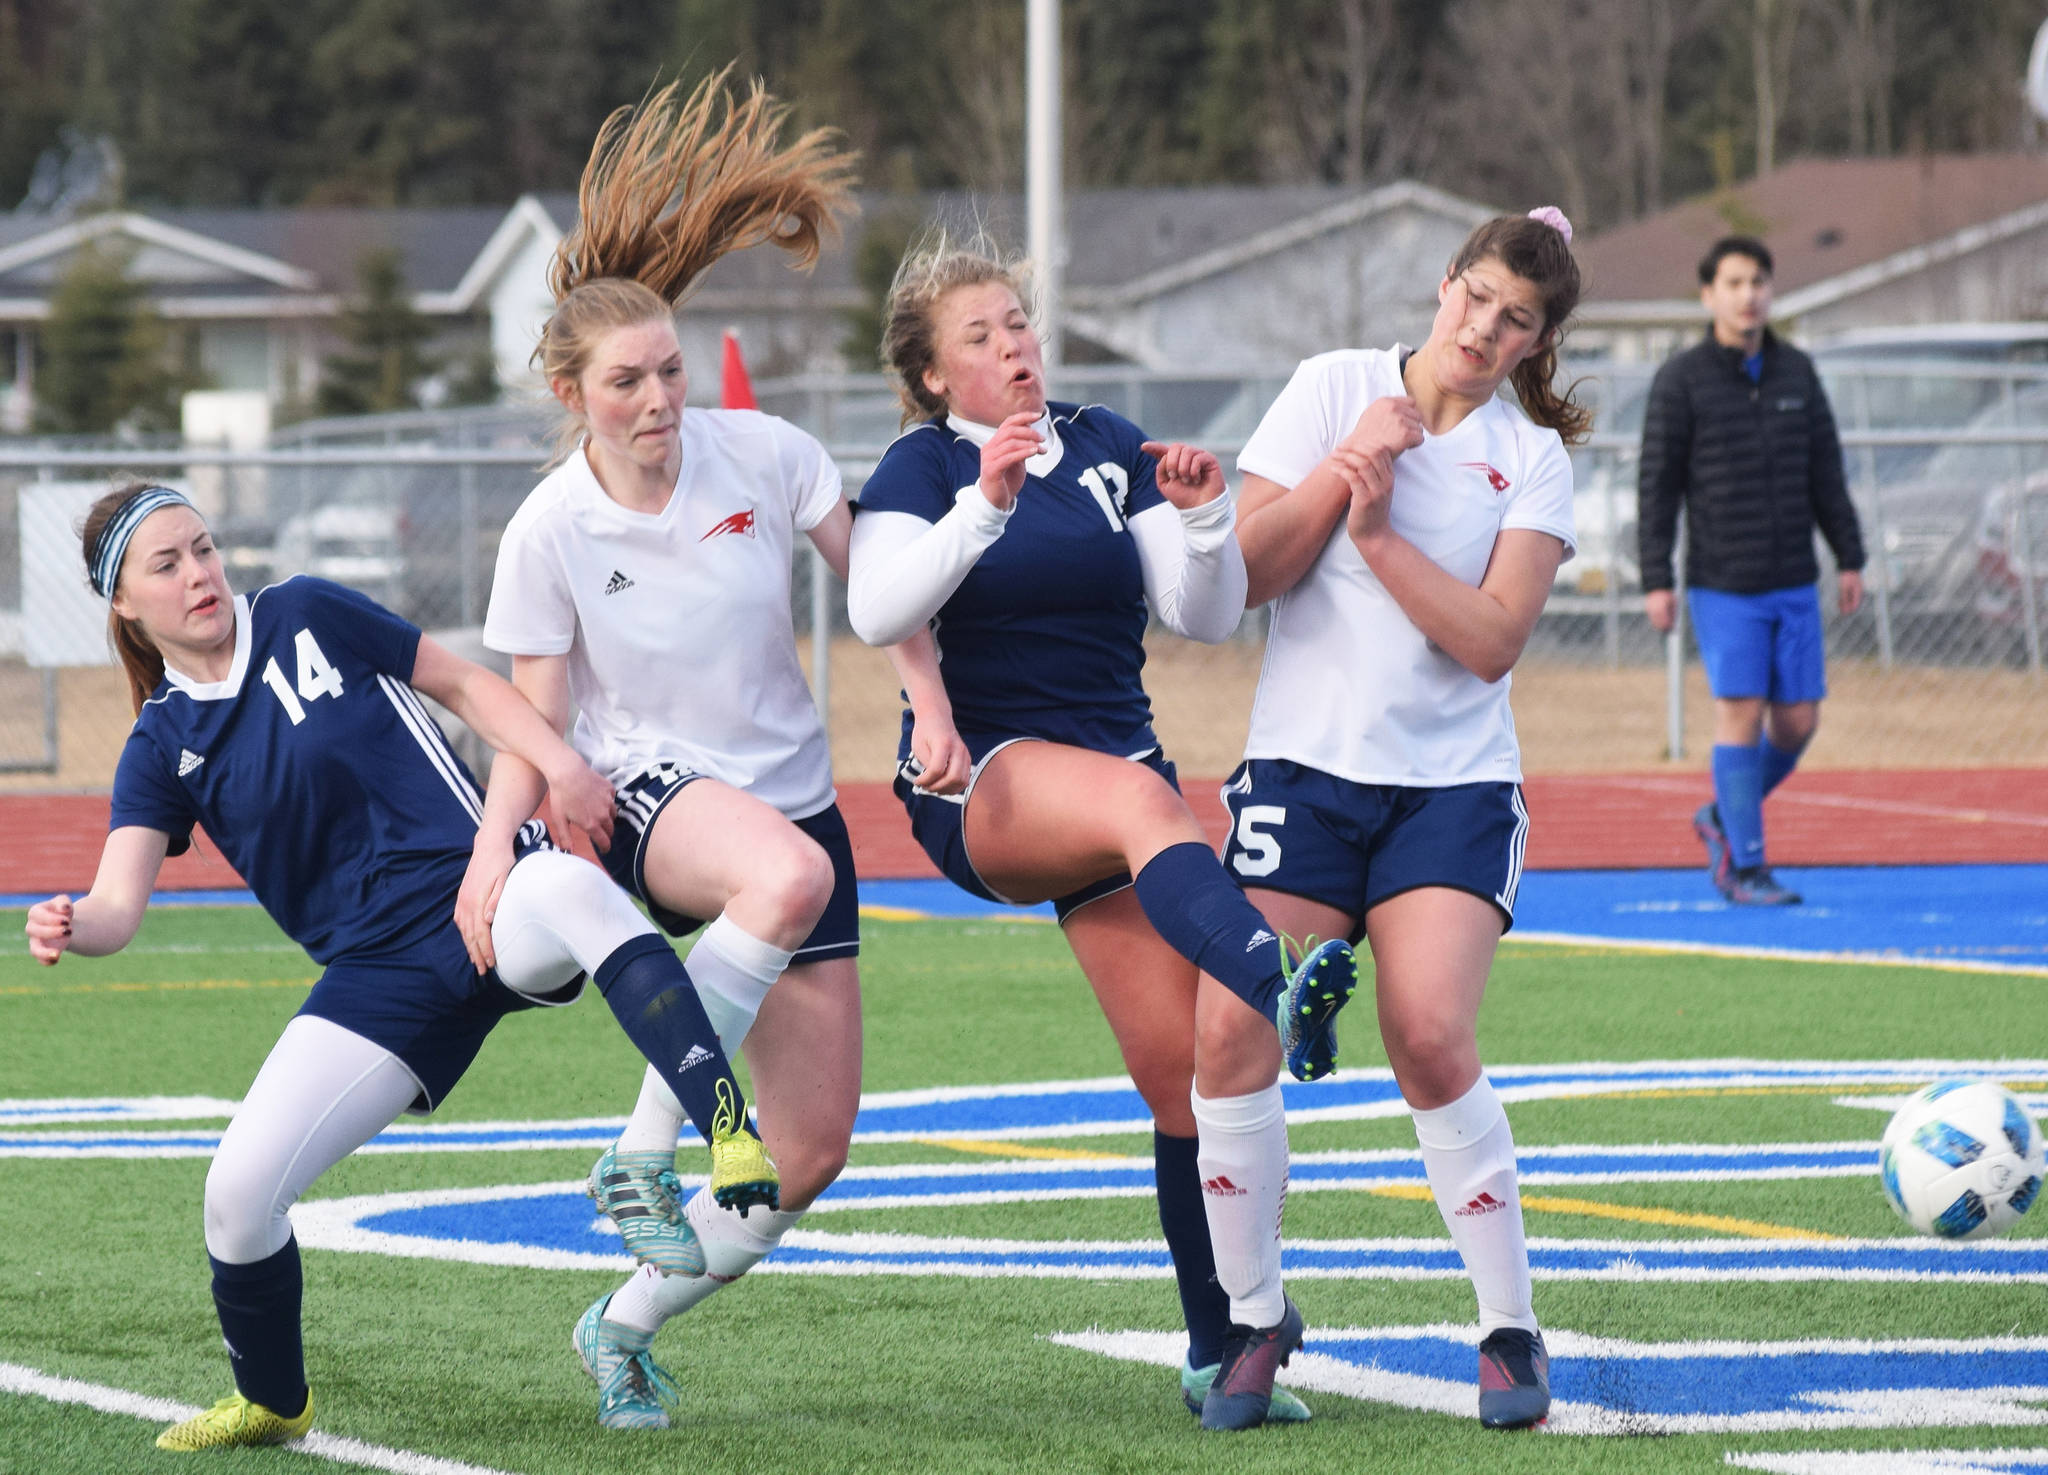 Soldotna players Kortney Birch (14) and Mykenna Foster collide with North Pole’s Breeauna O’Rear (middle left) and Mari Ana Beks, Friday, April 12, 2019, in a nonconference game at Soldotna High School. (Photo by Joey Klecka/Peninsula Clarion)